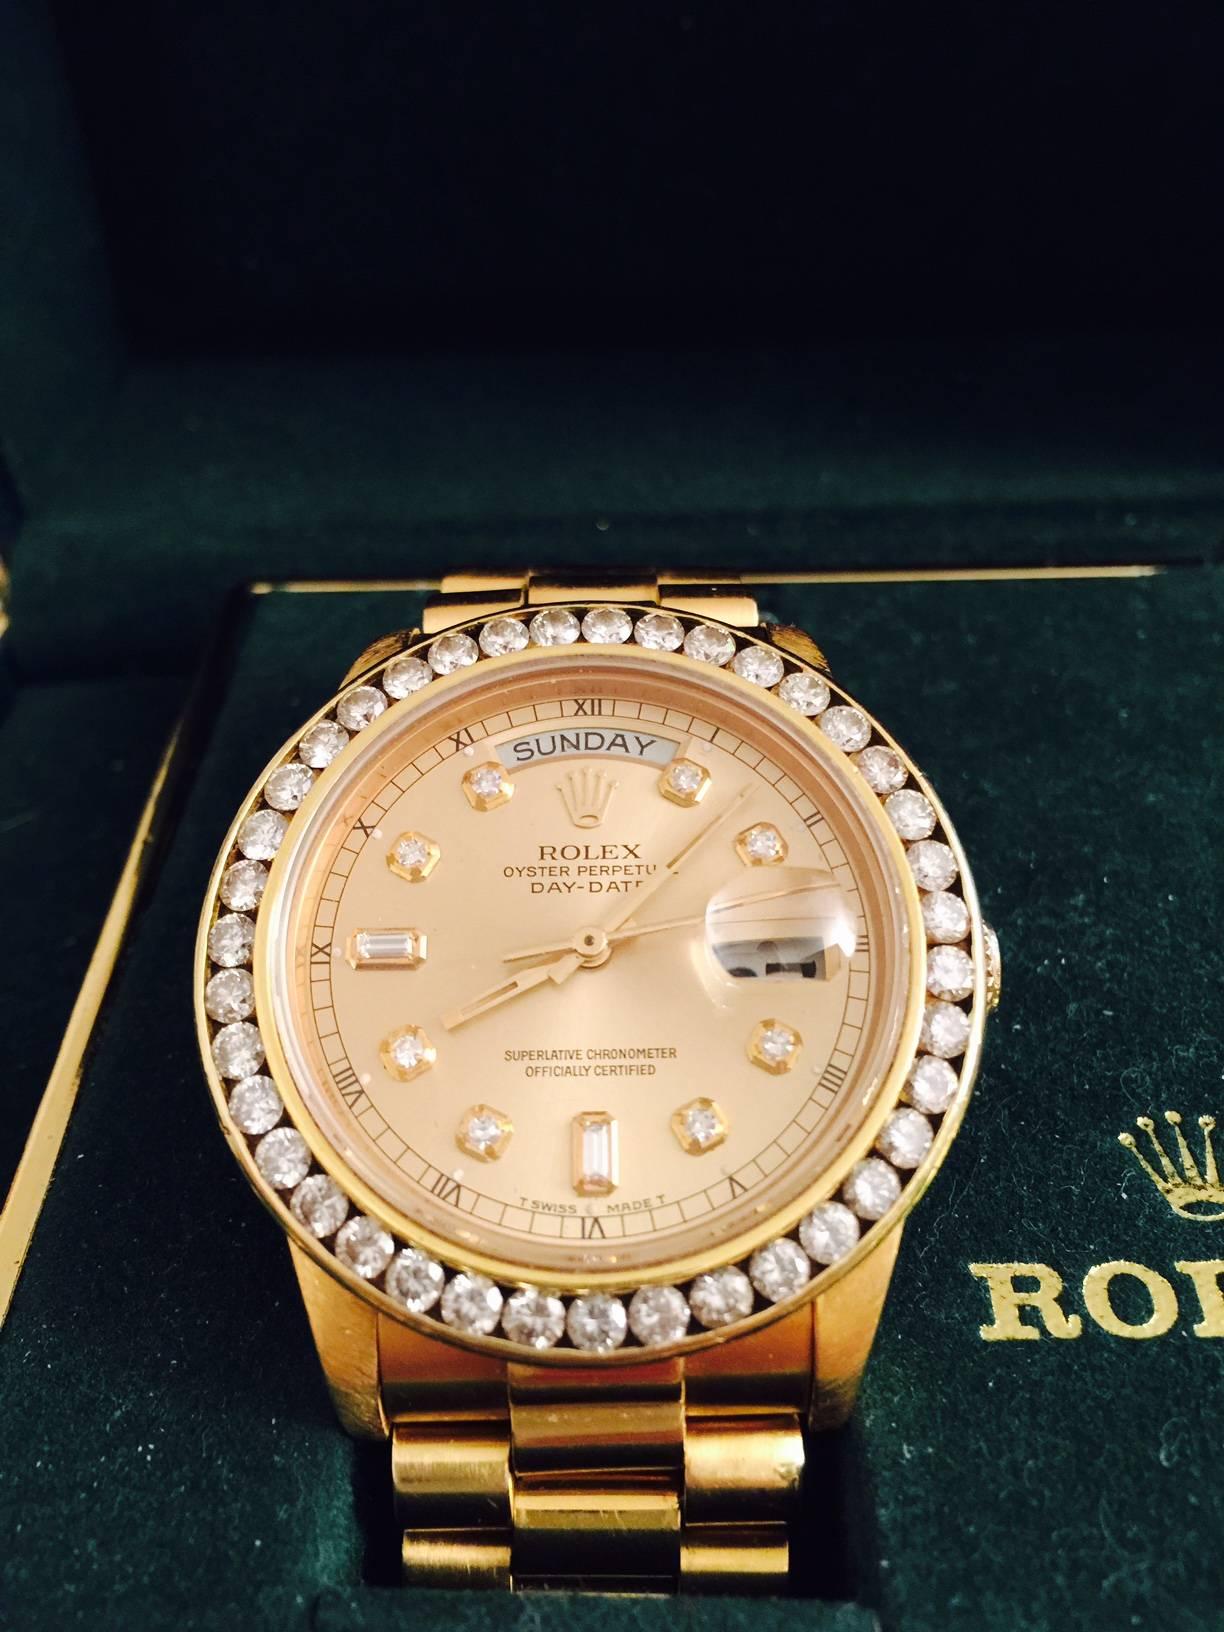 Beautiful Rolex President 18-karat yellow gold wristwatch Ref 18038. This spectacular wristwatch dates from approximately 1982 and features a custom channel set 2+ carat diamond bezel with champagne diamond dial/hour markers (all aftermarket.) It is